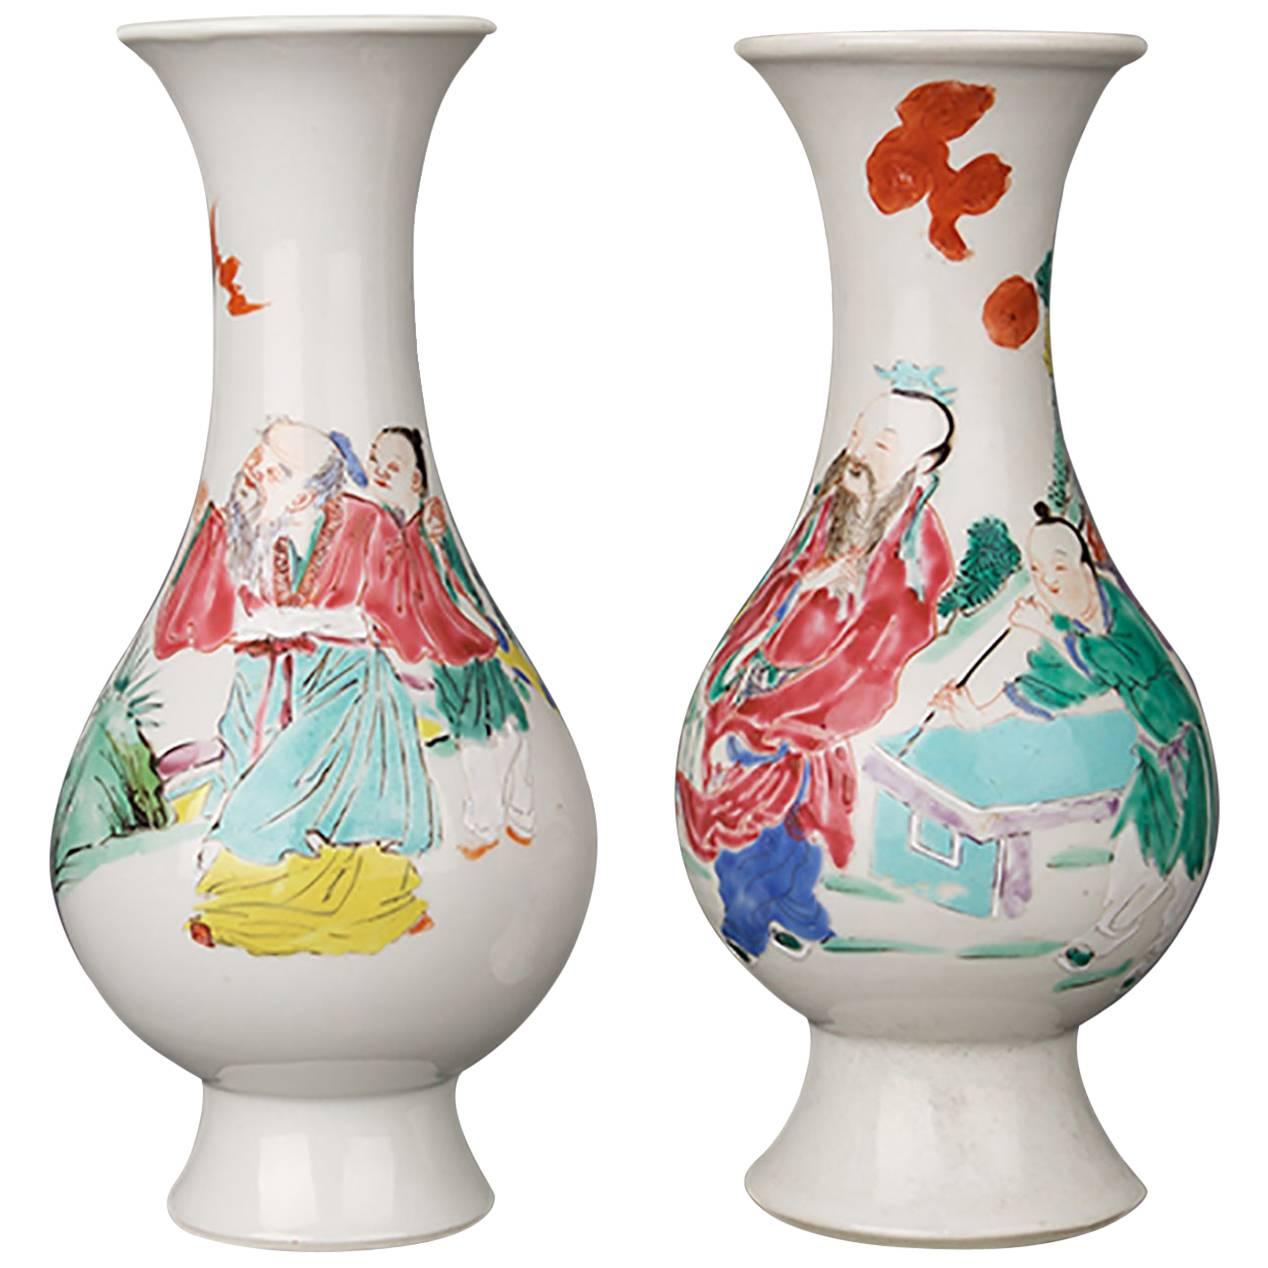 Pair of Chinese Porcelain Famille Rose Bulbous Vases, 18th Century